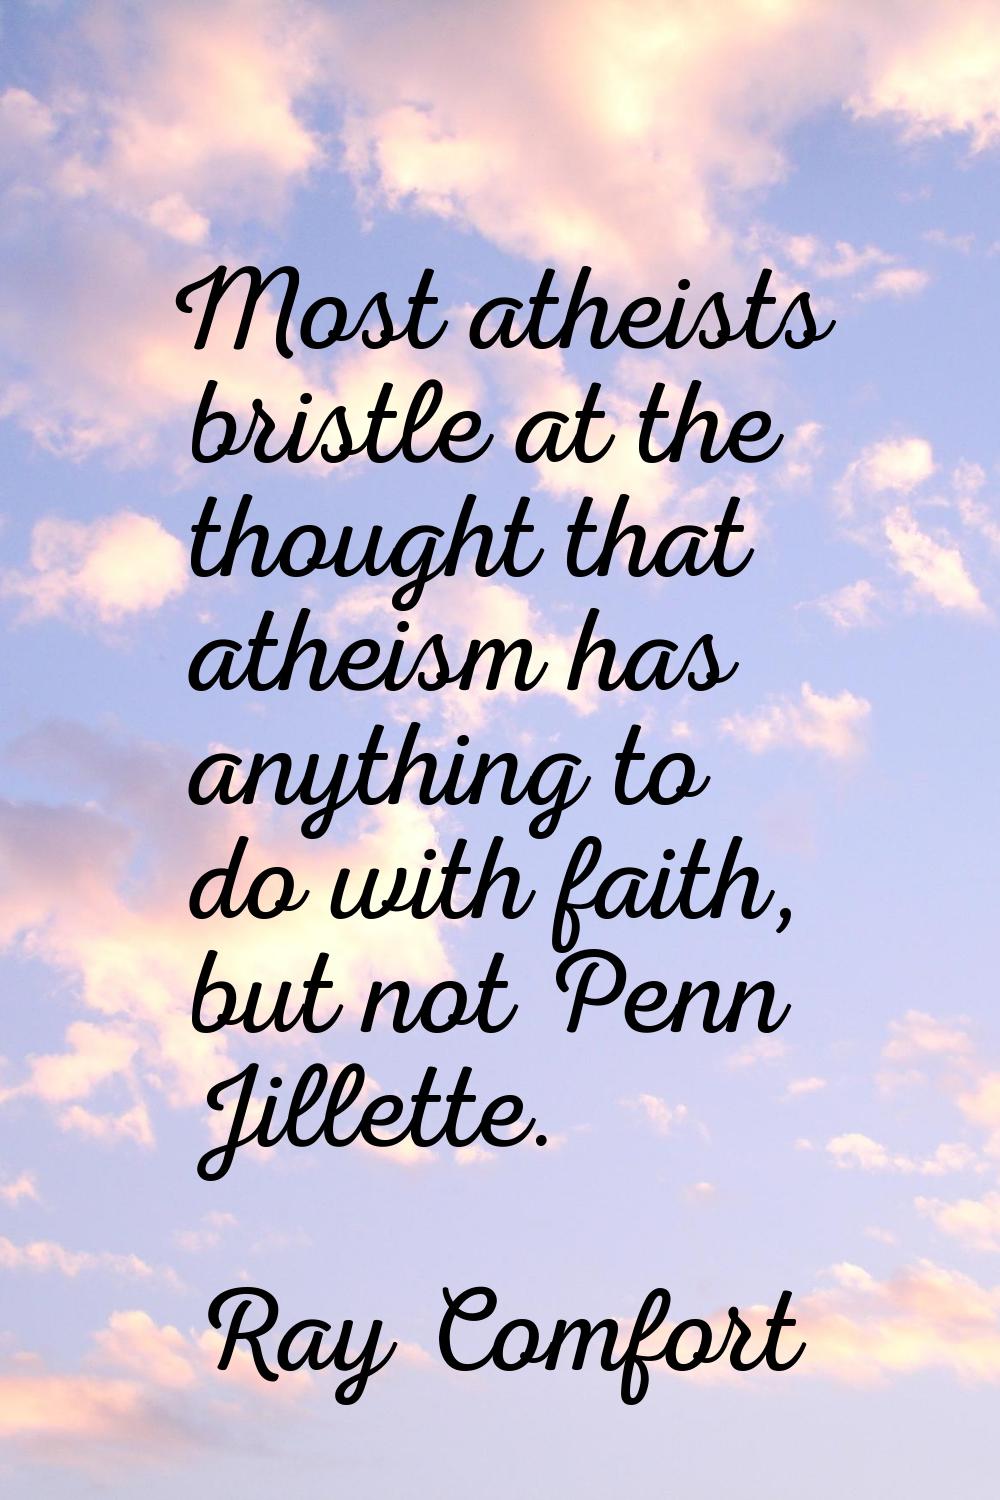 Most atheists bristle at the thought that atheism has anything to do with faith, but not Penn Jille